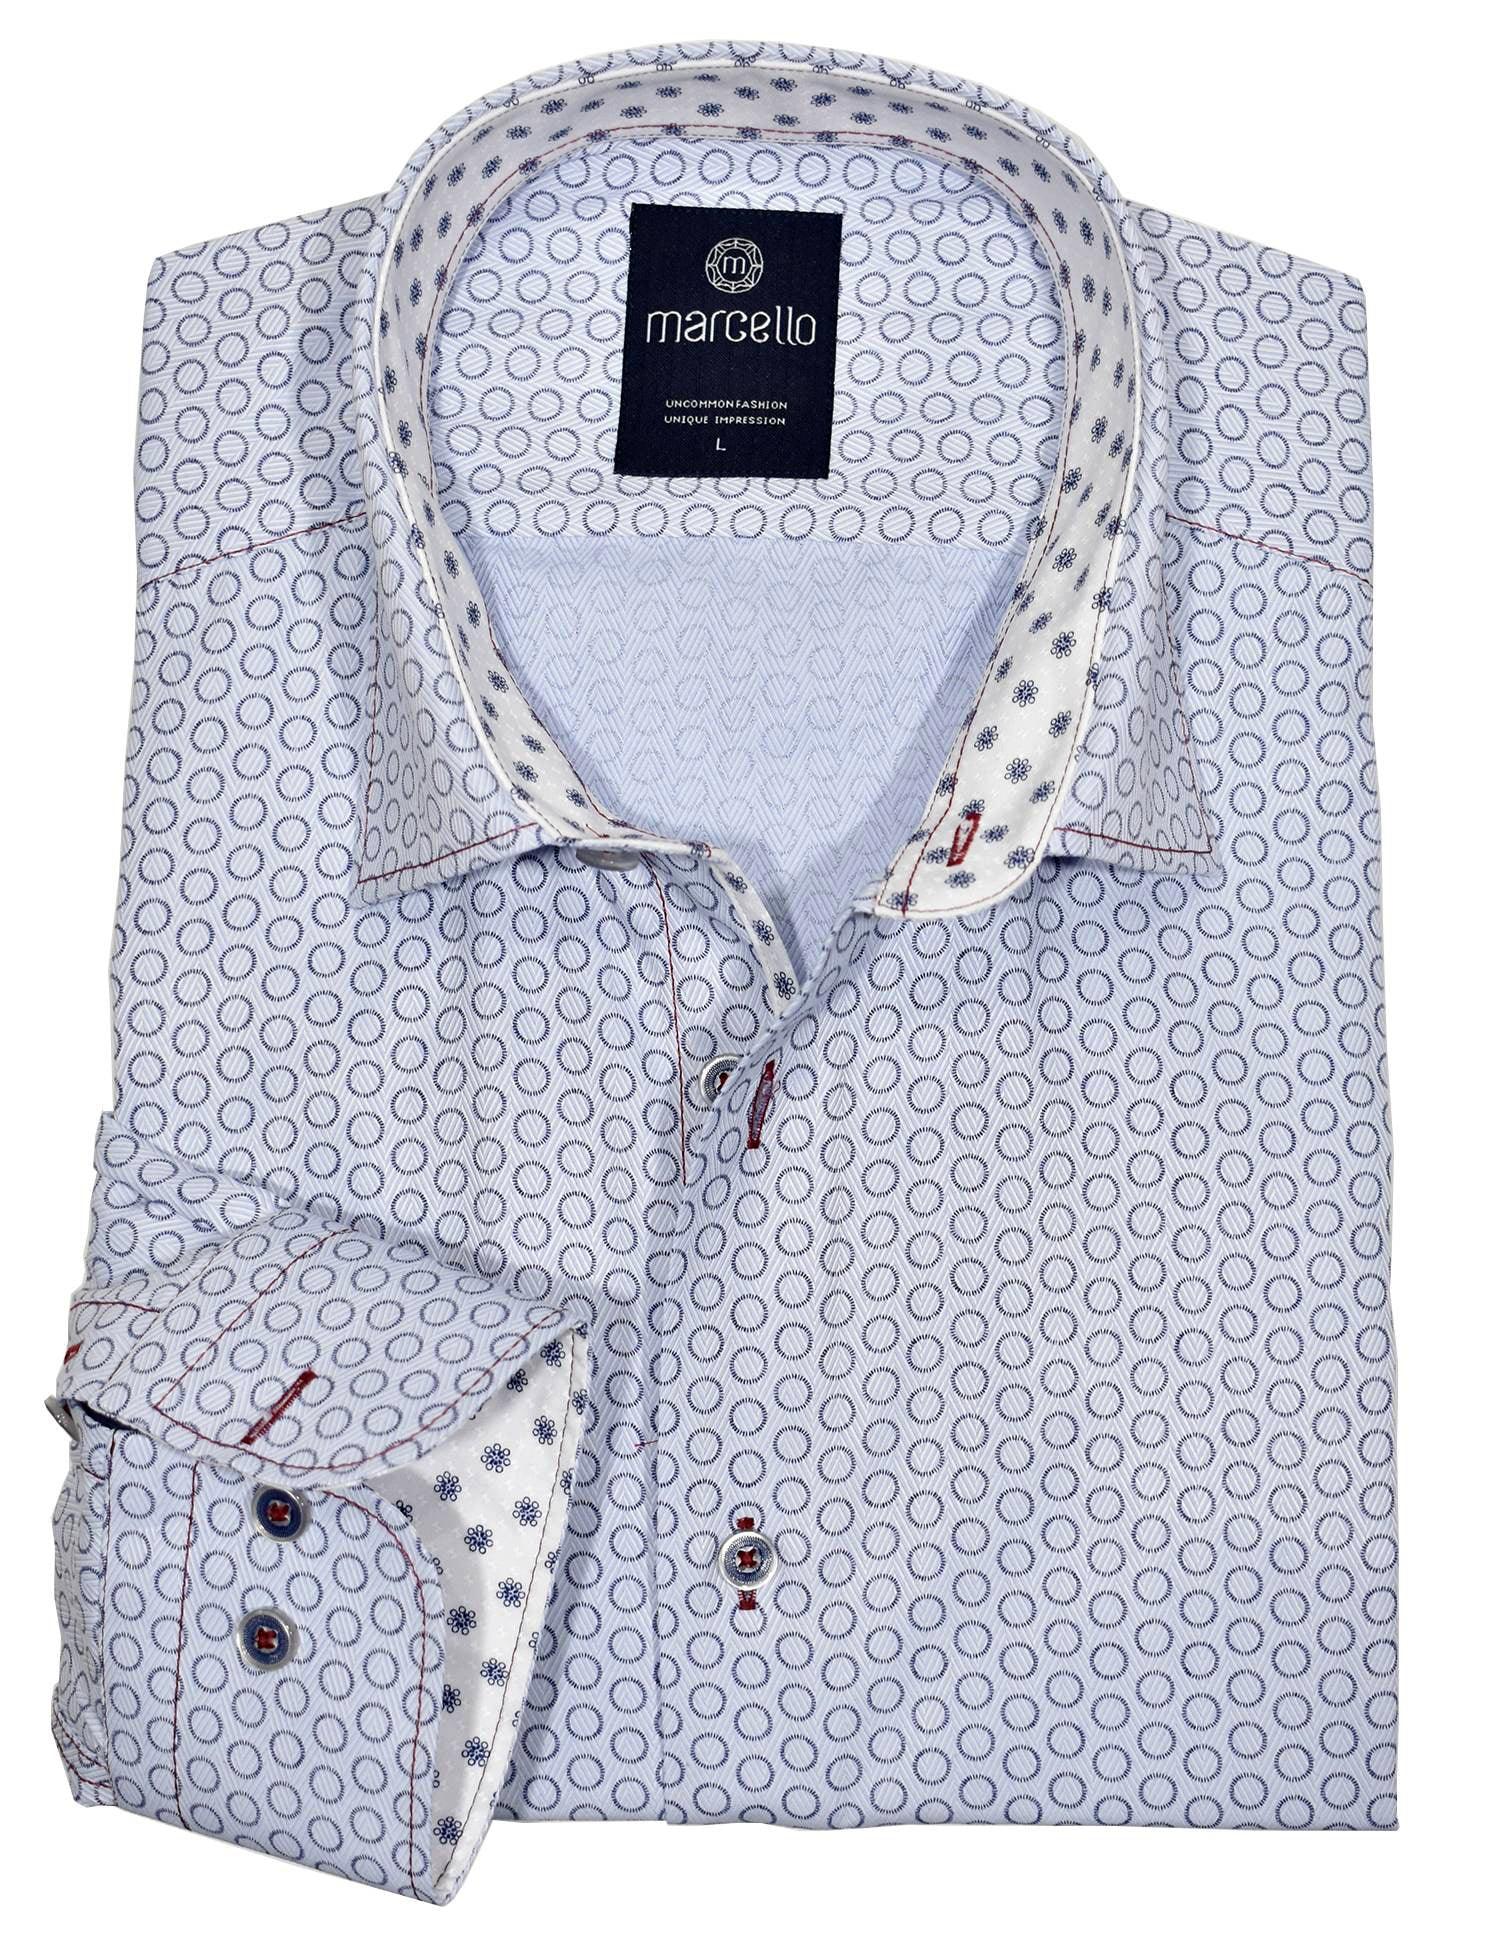 Ultra soft cotton. Fine herringbone jacquard fabric. Contrast fashion stitch work. Custom selected buttons. 2 button signature cuffs. Classic shaped fit. Shirt by Marcello Sport